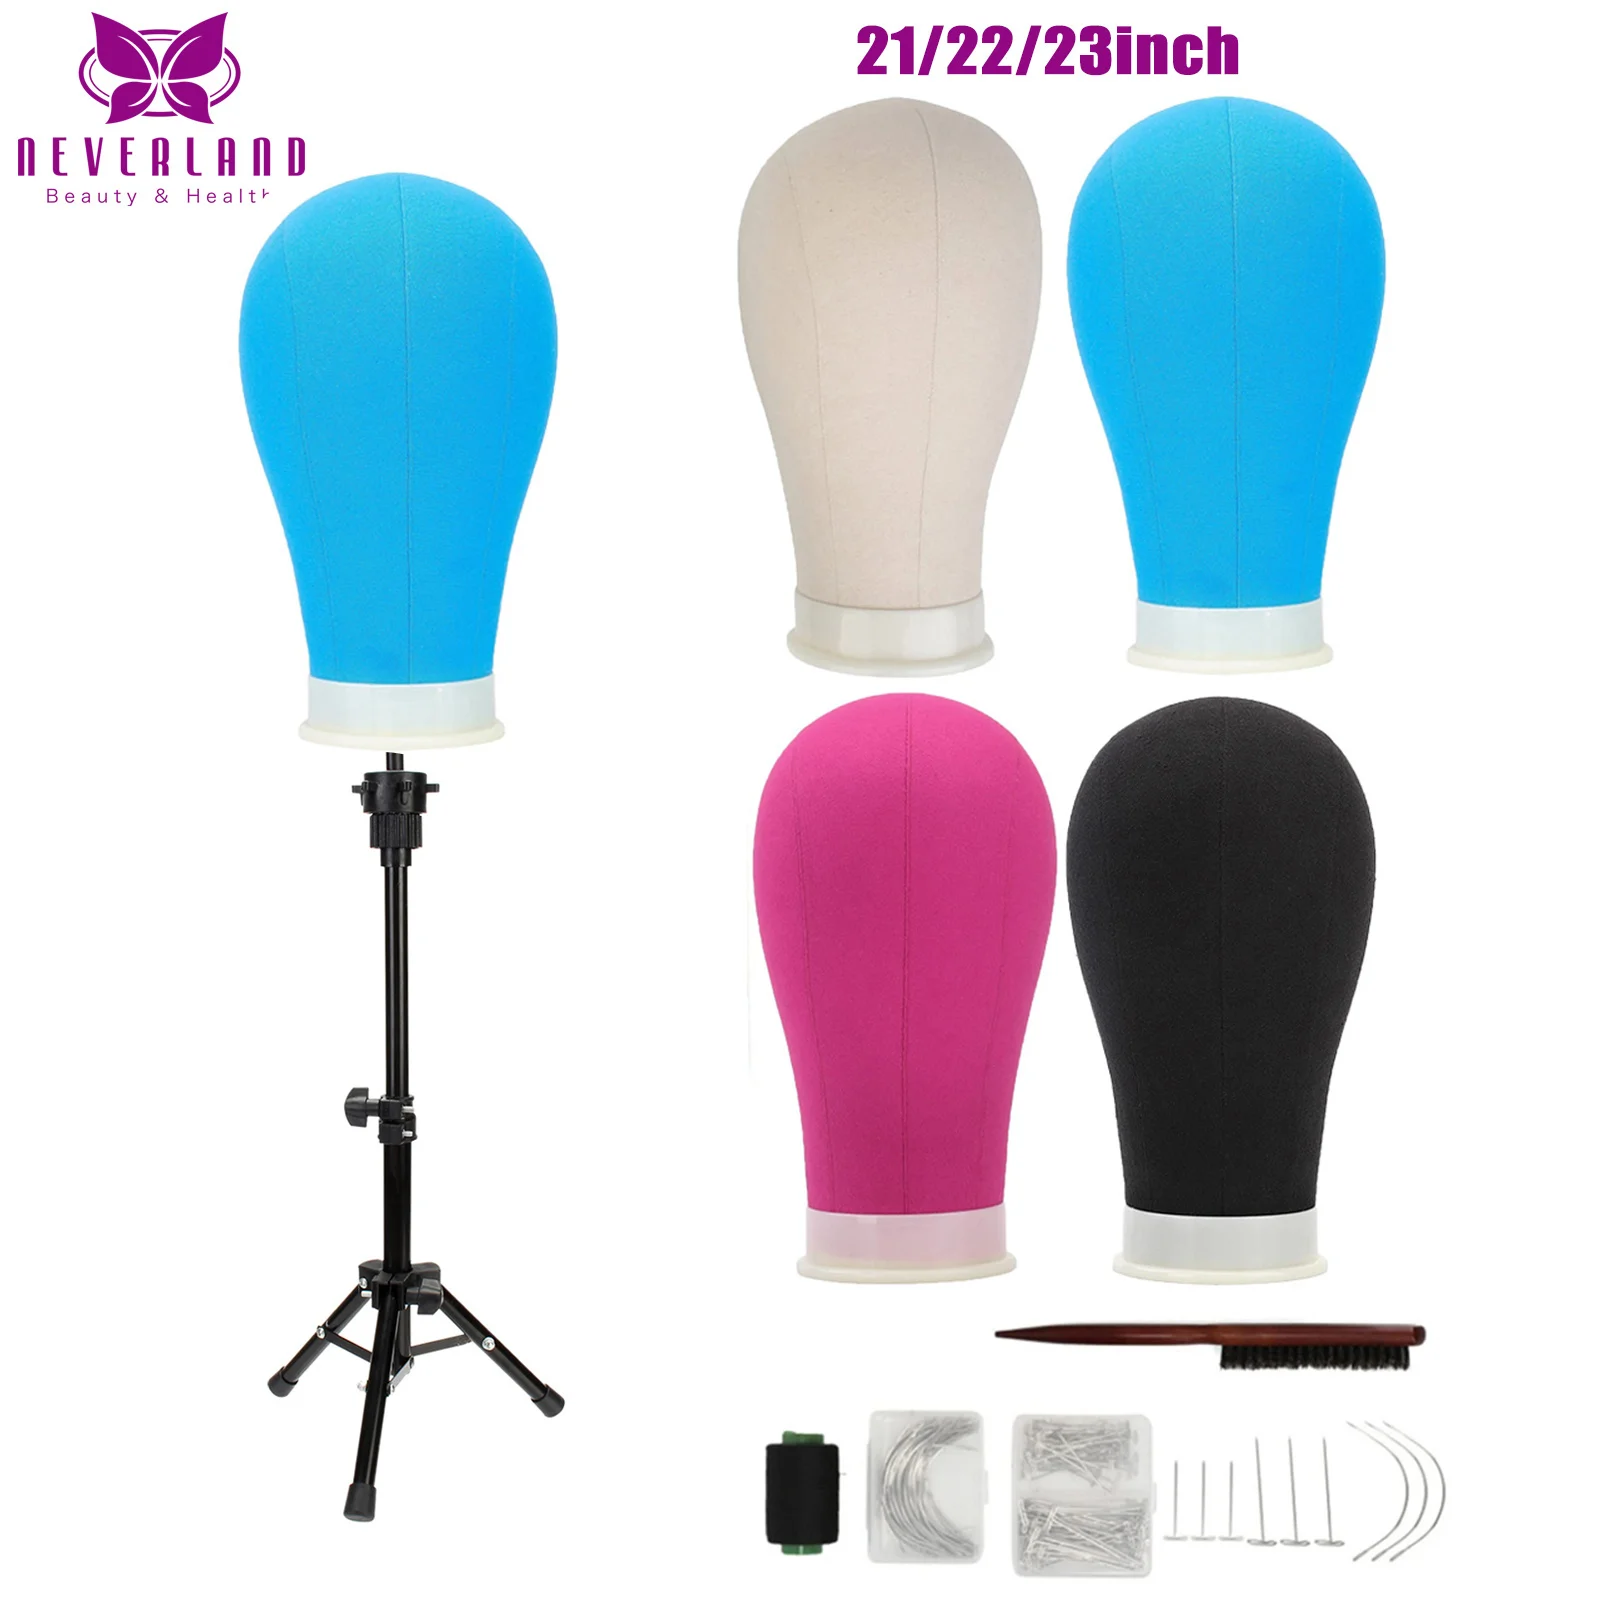 New Wig Stand With Three Holders For Canvas Head For Wig Making Mannequin  Head For Wig Display Hairdressing Training Doll Head - Wig Stands -  AliExpress